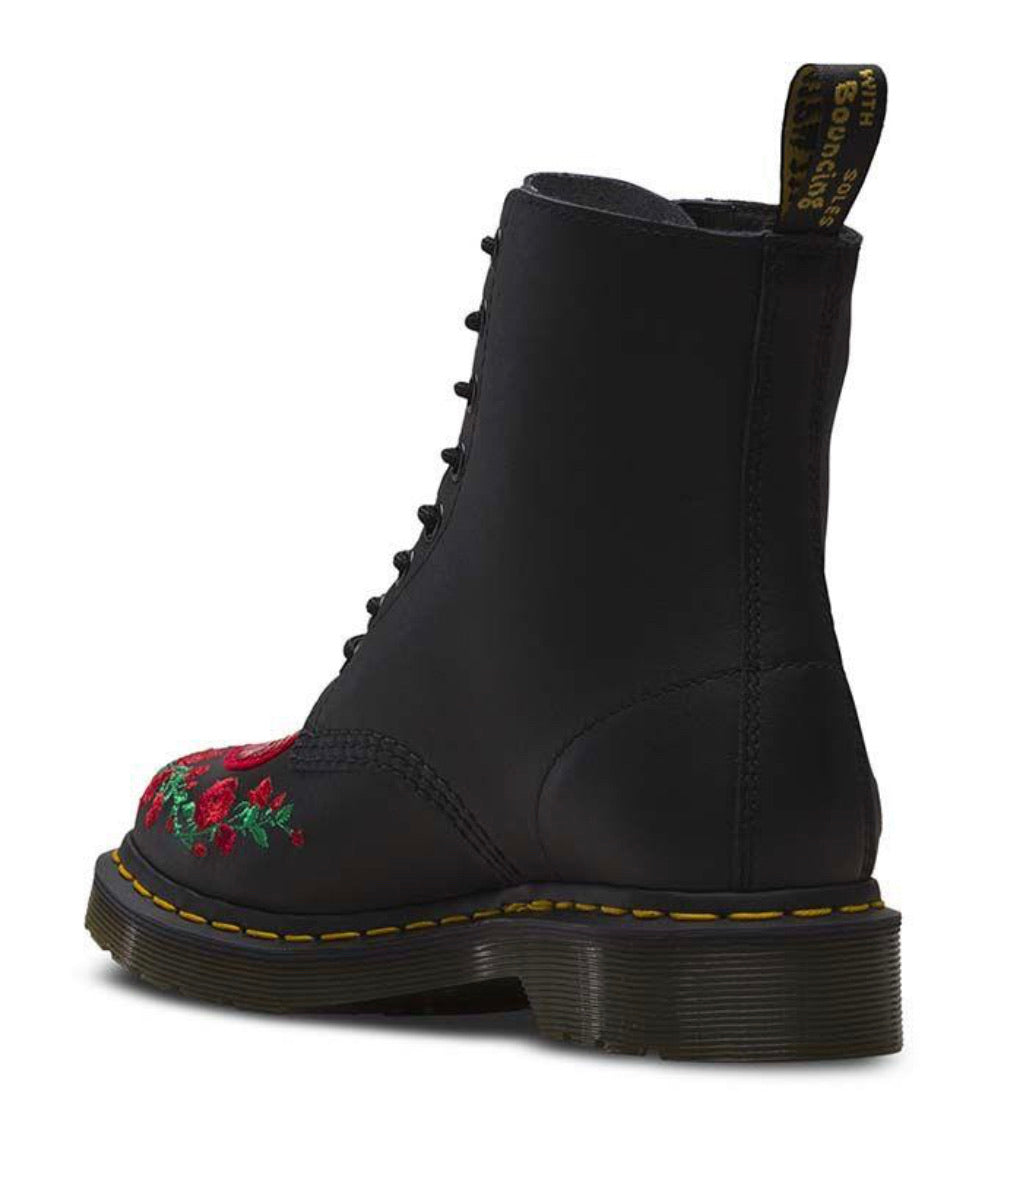 Dr. Martens 1460 Pascal Black Hearts Ankle 8 Eyelet Boot